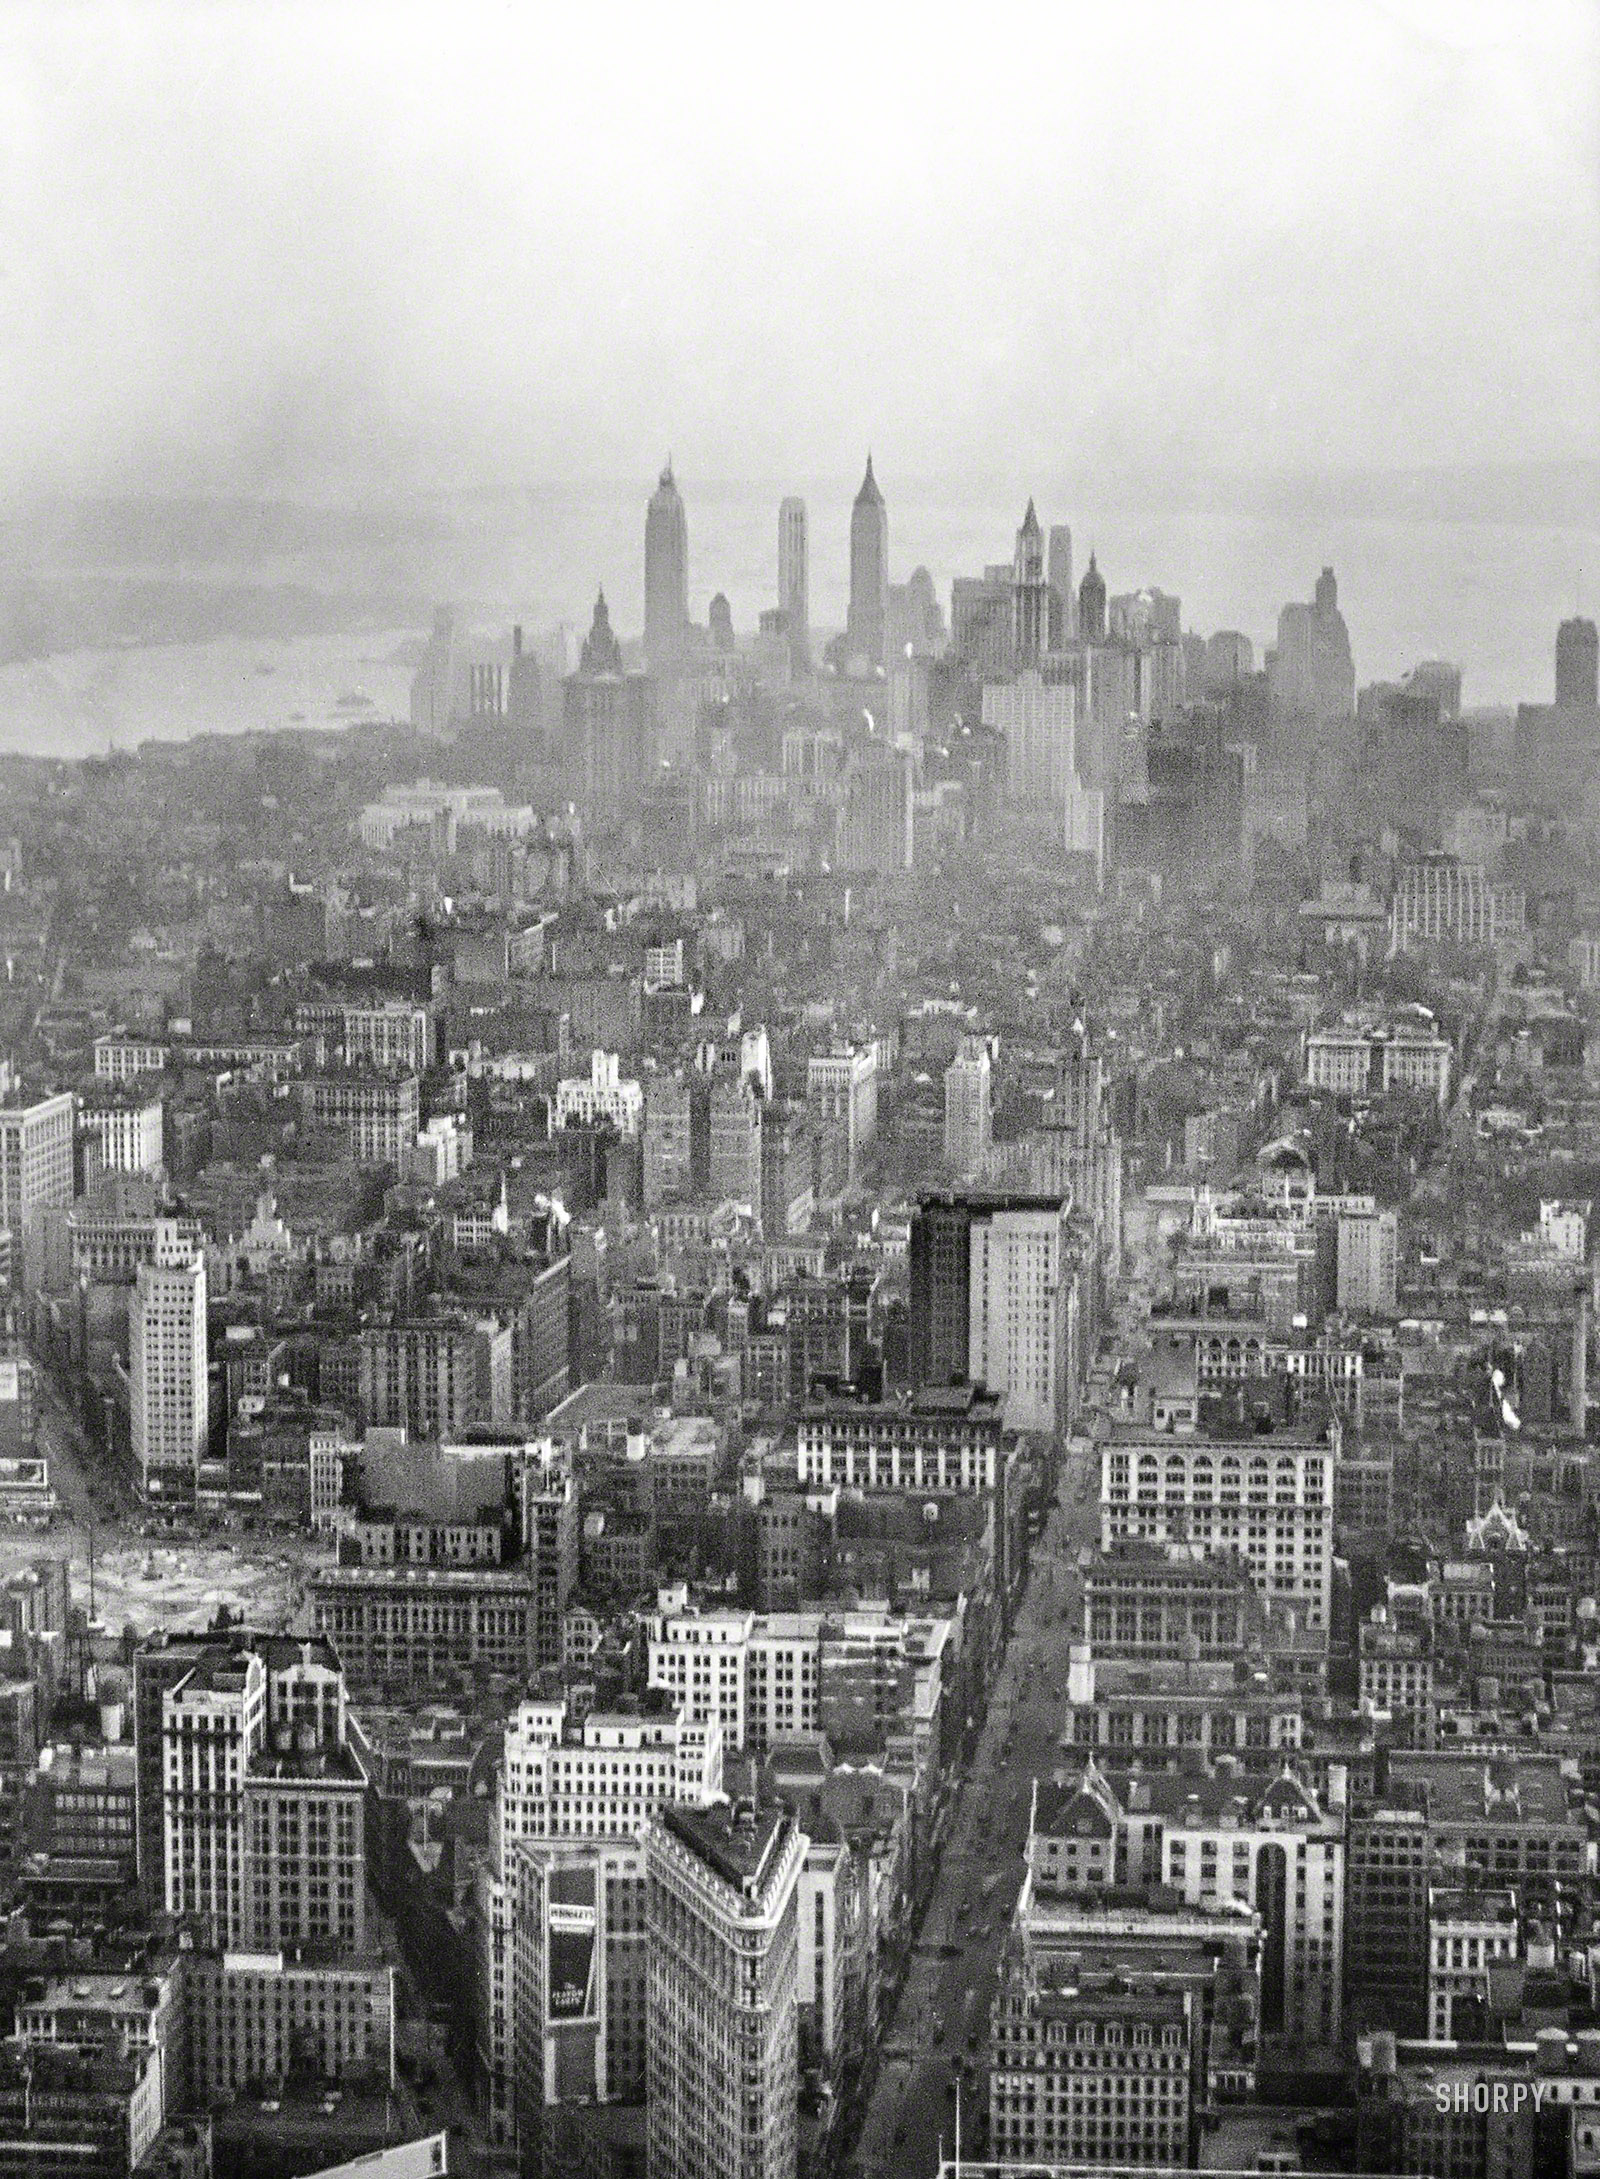 1932. "New York City views, skyline." Front-and-center is our old friend the Flatiron Building. 4x5 nitrate negative by Arnold Genthe. View full size.